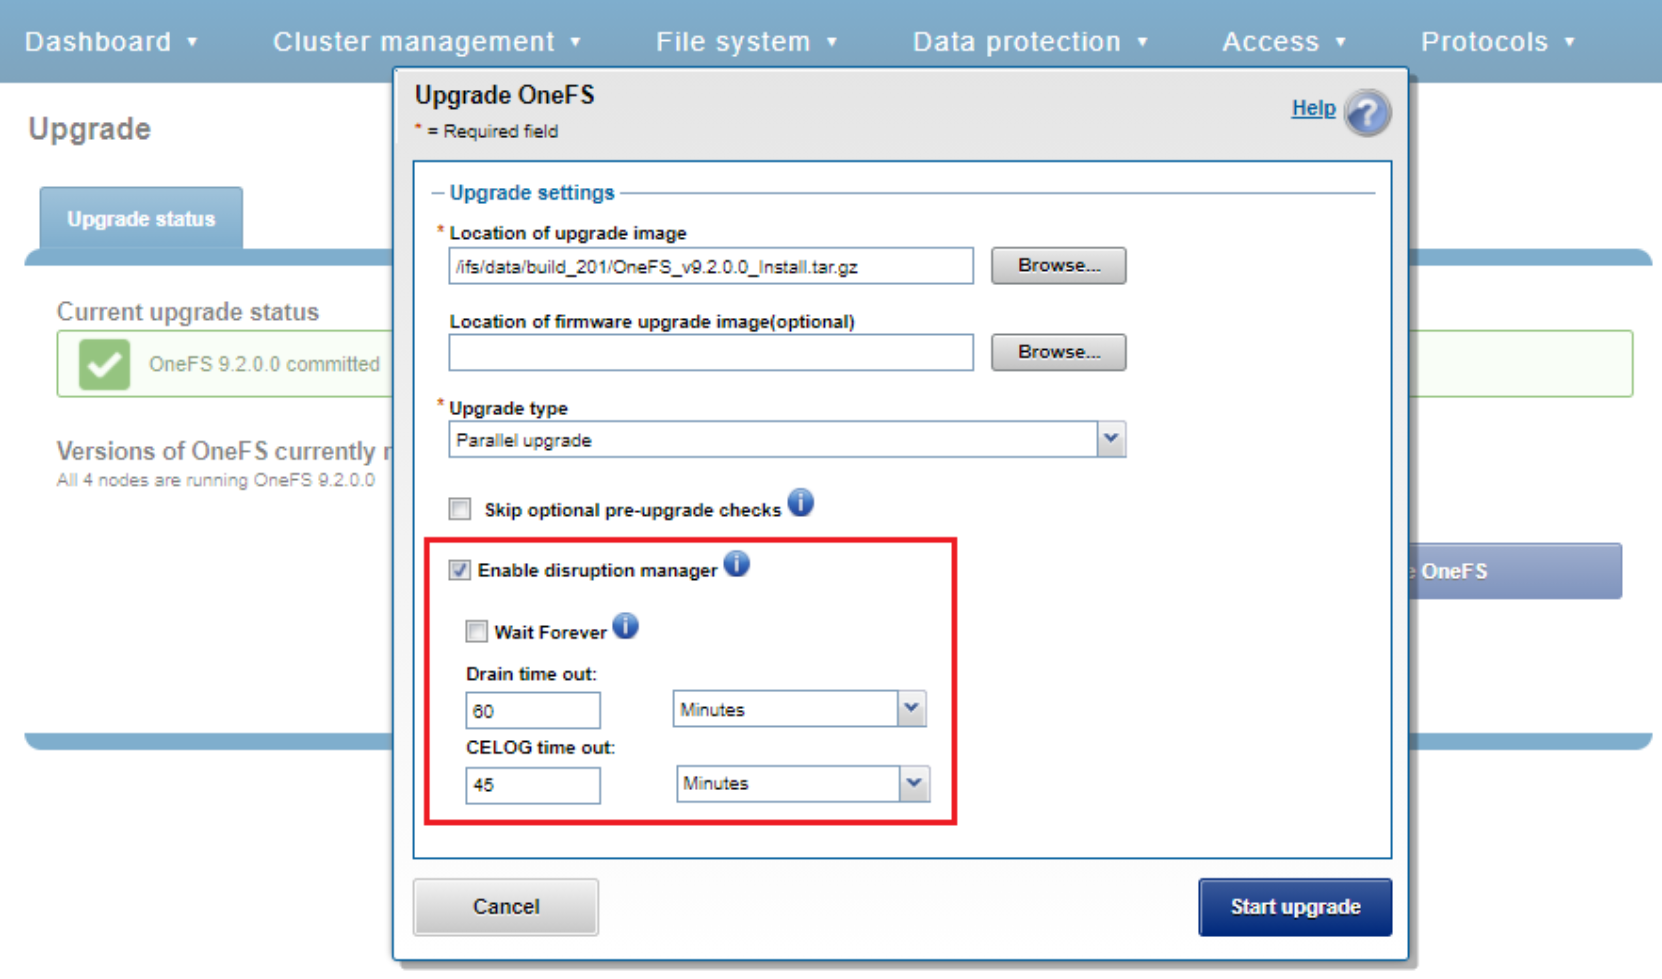 WebUI screenshot showing OneFS parallel upgrade disruption manager configuration.